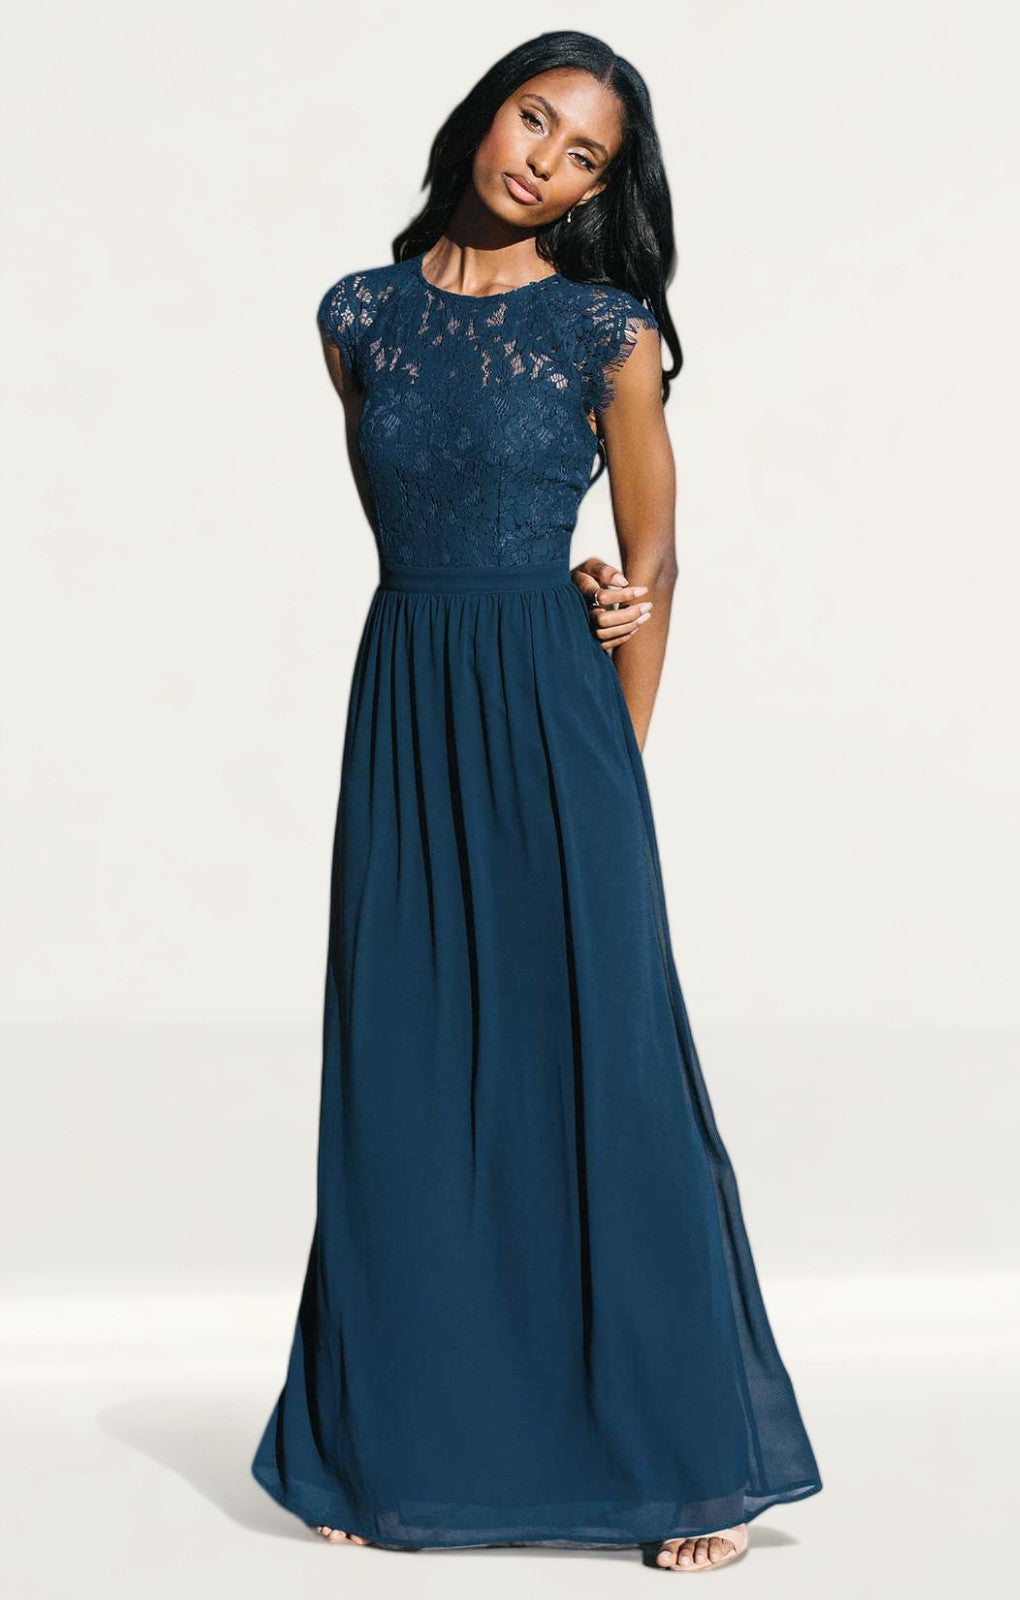 Lipsy Navy Lace Top Maxi Dress product image